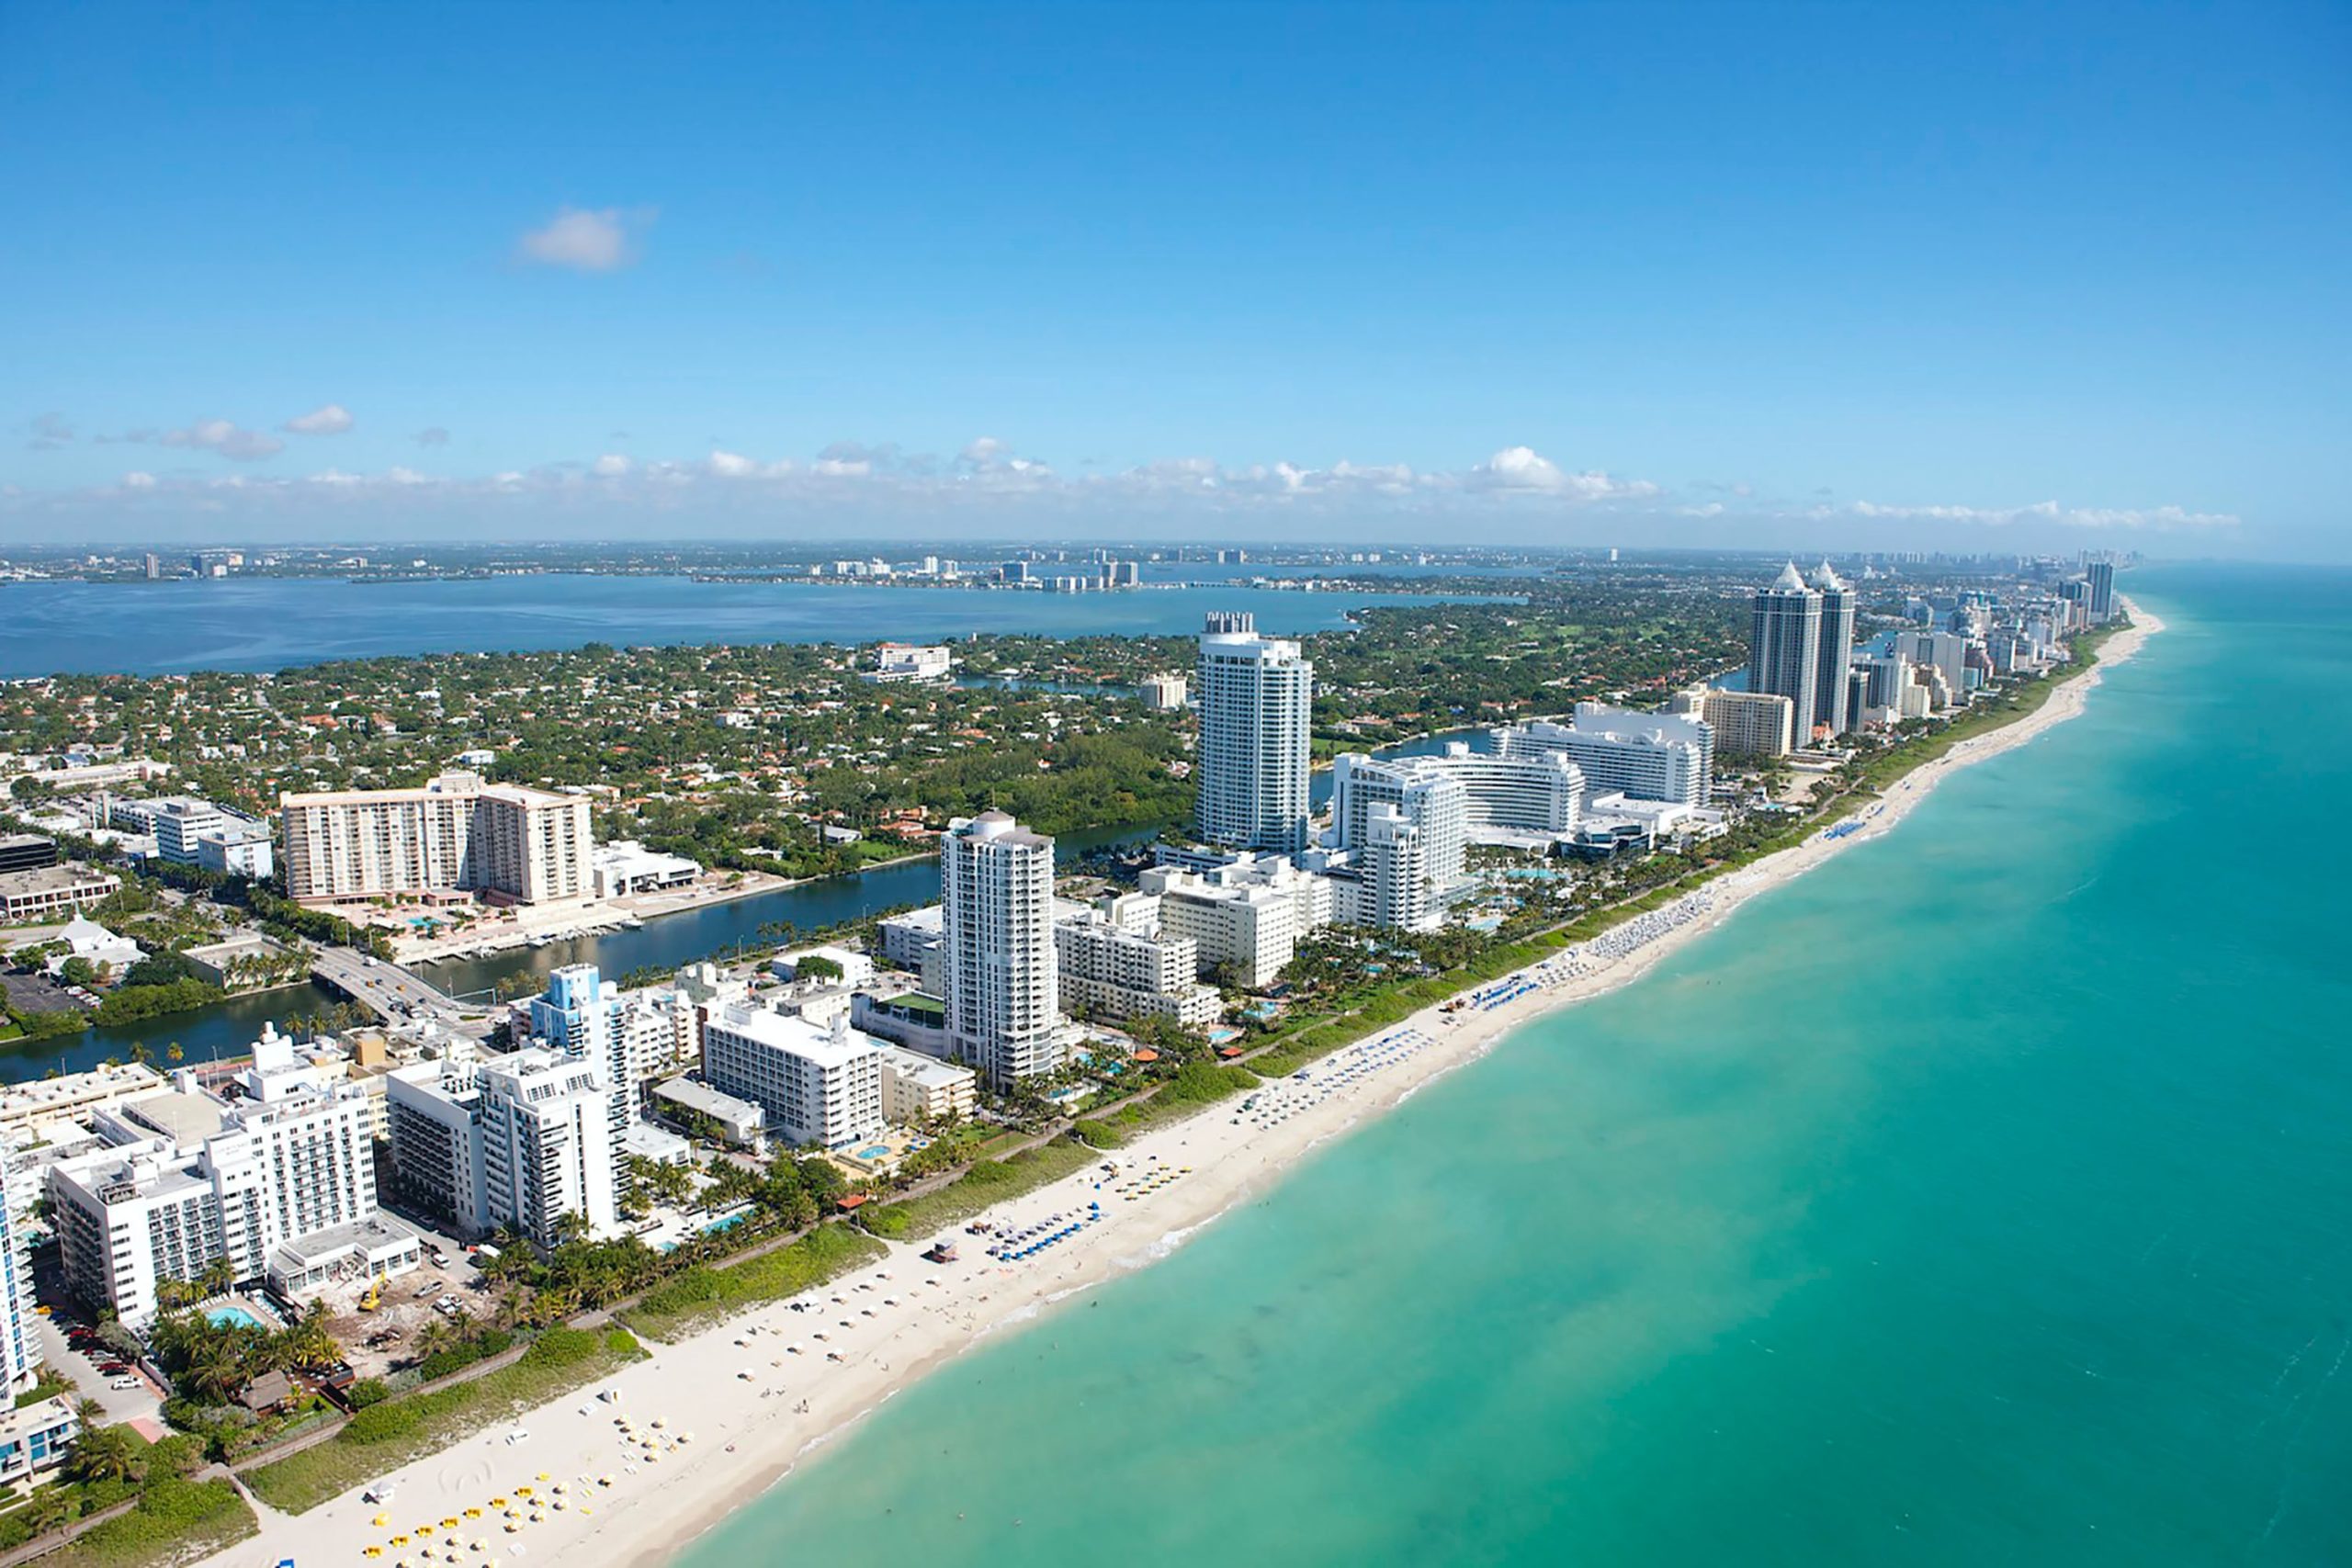 Miami’s Travel Market Nearly Fully Recovered Despite Rules Banning Some International Tourists